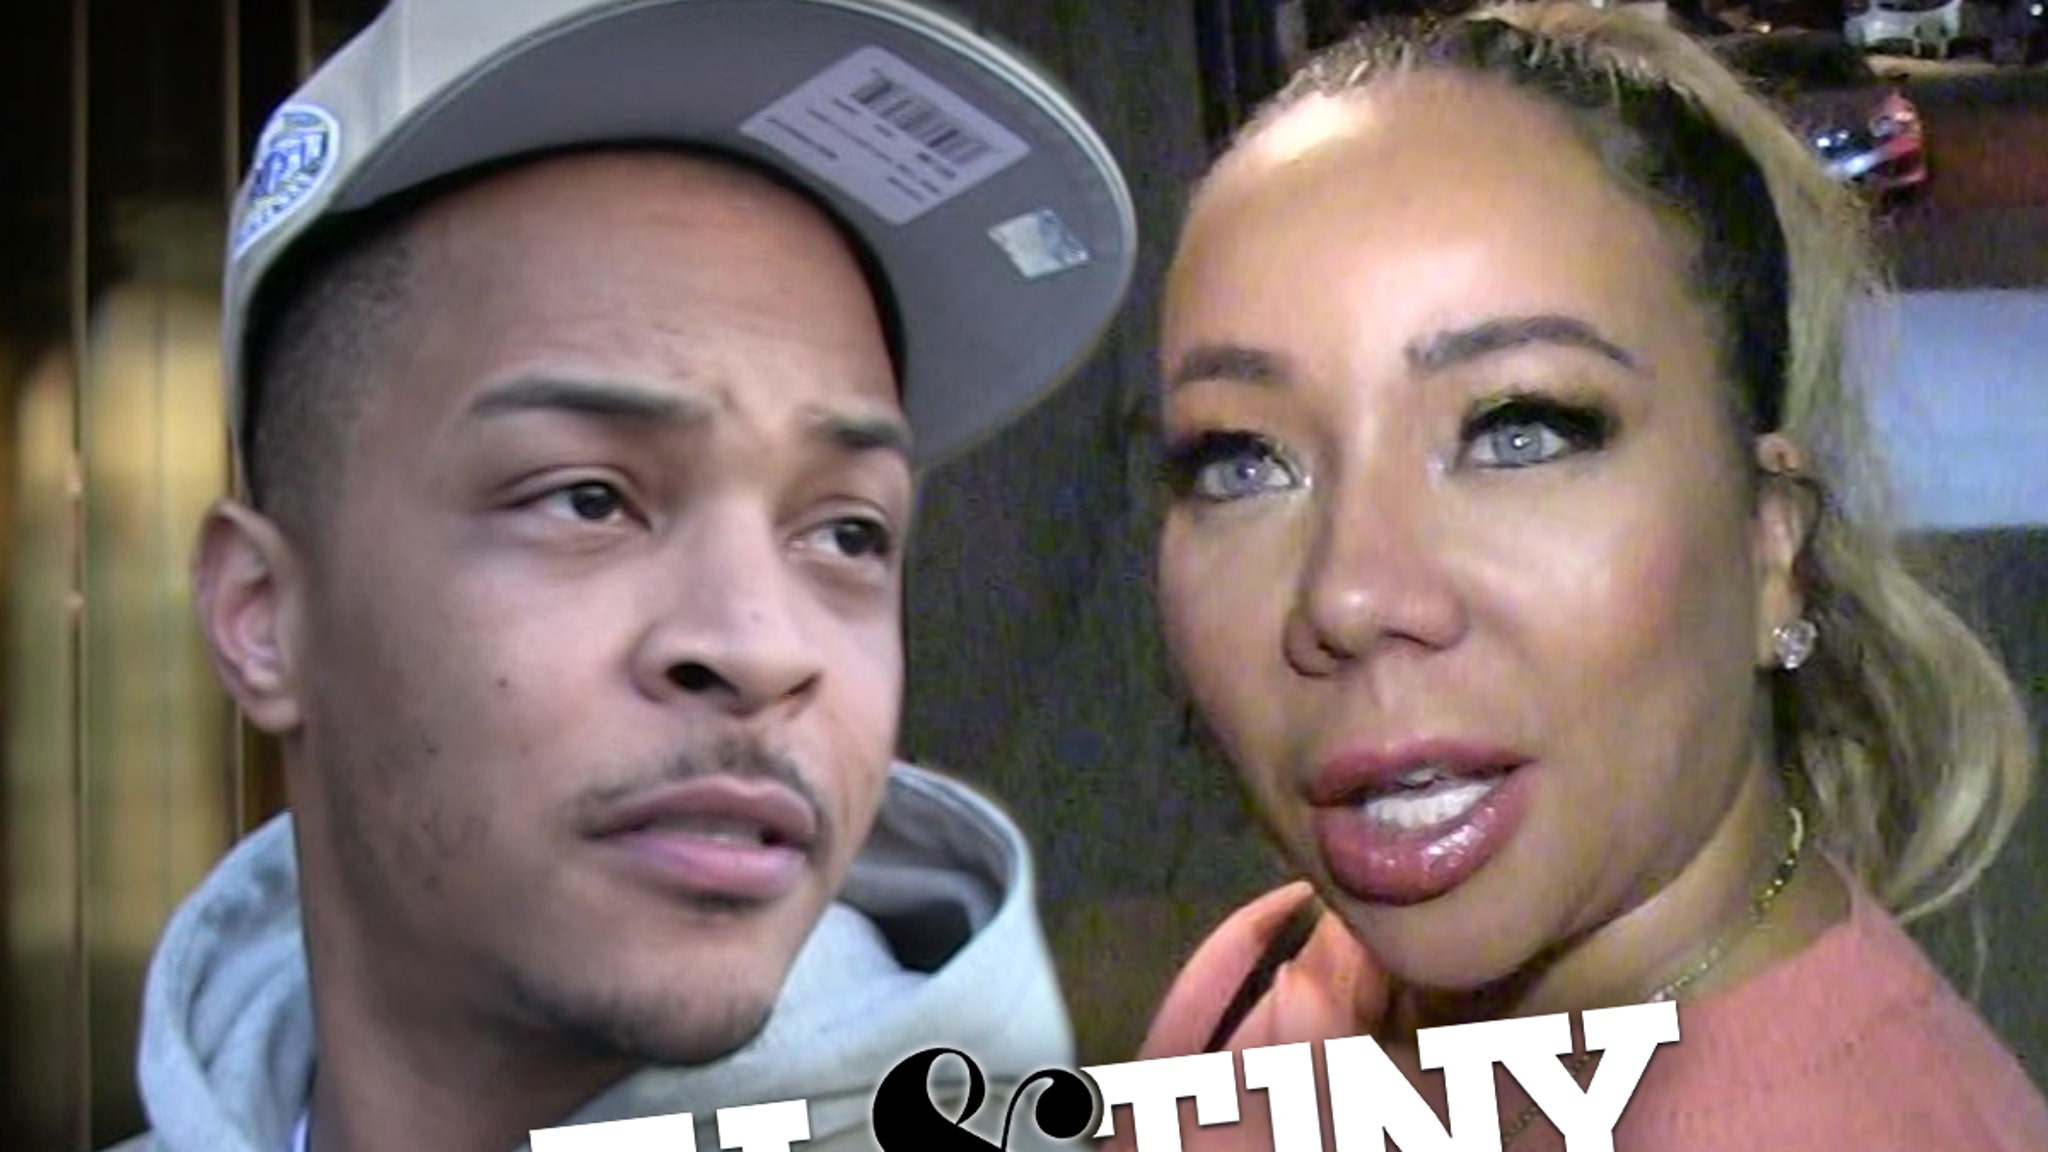 TI’s reality show pauses production after allegations of sexual abuse